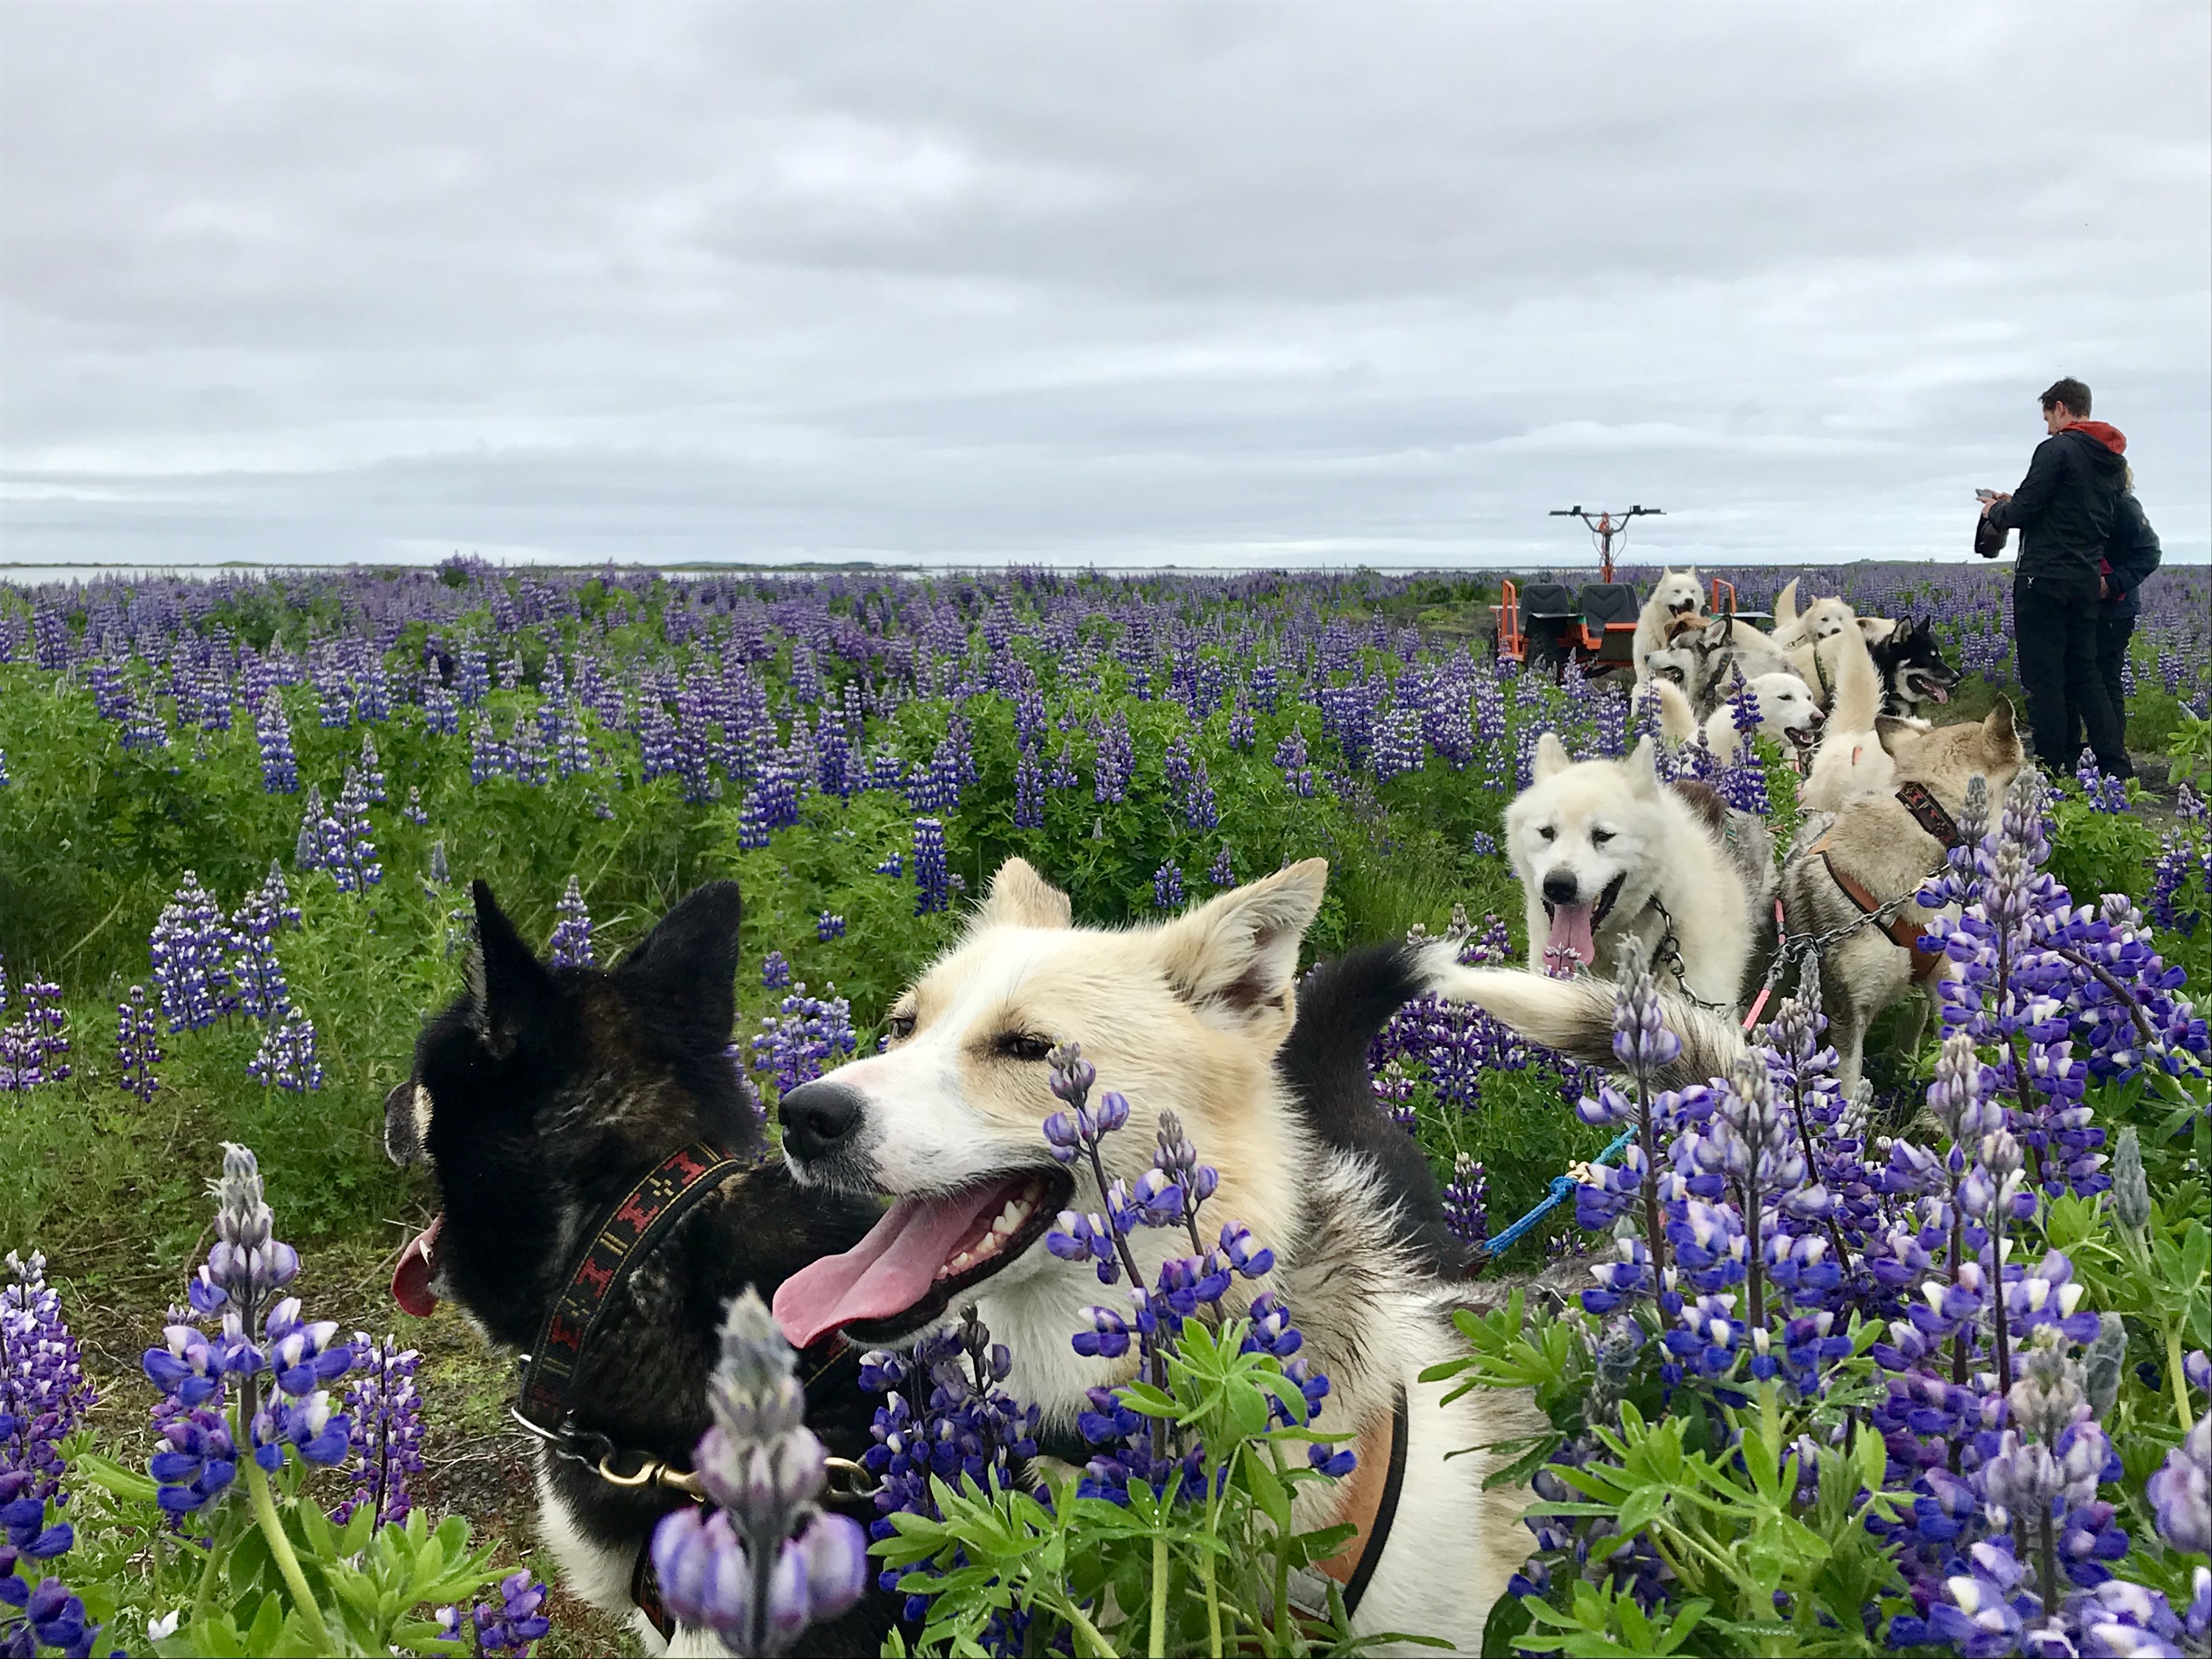 Husky dry-land sled dogs in a field.